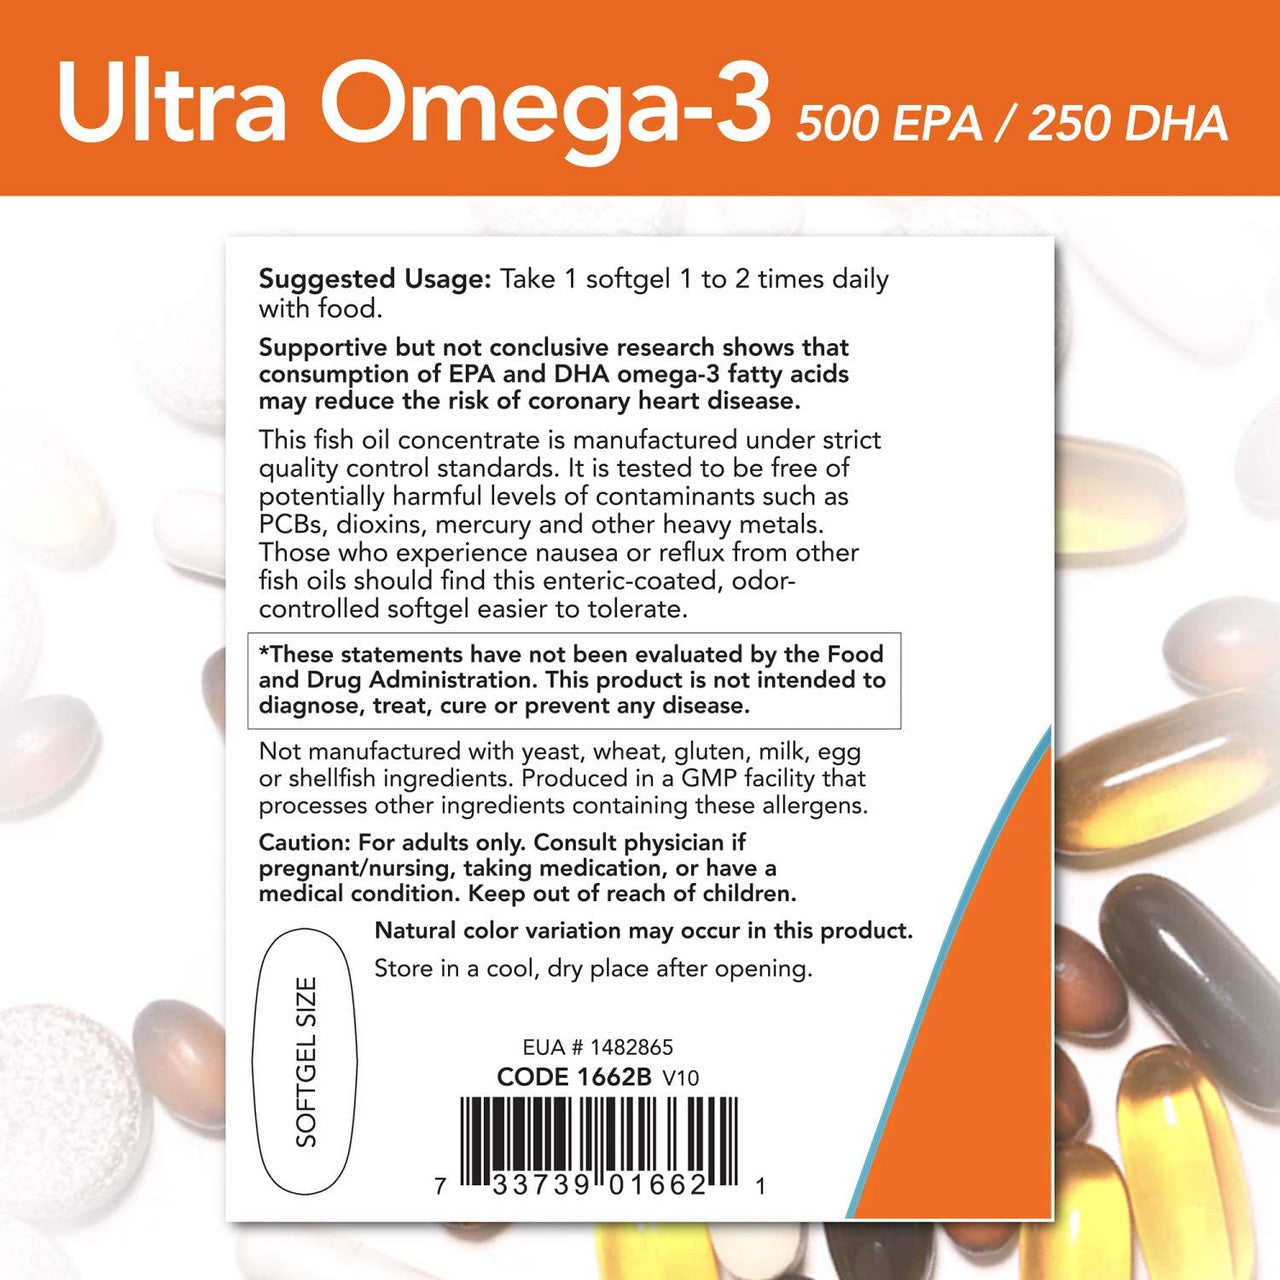 Now Ultra Omega-3 directions